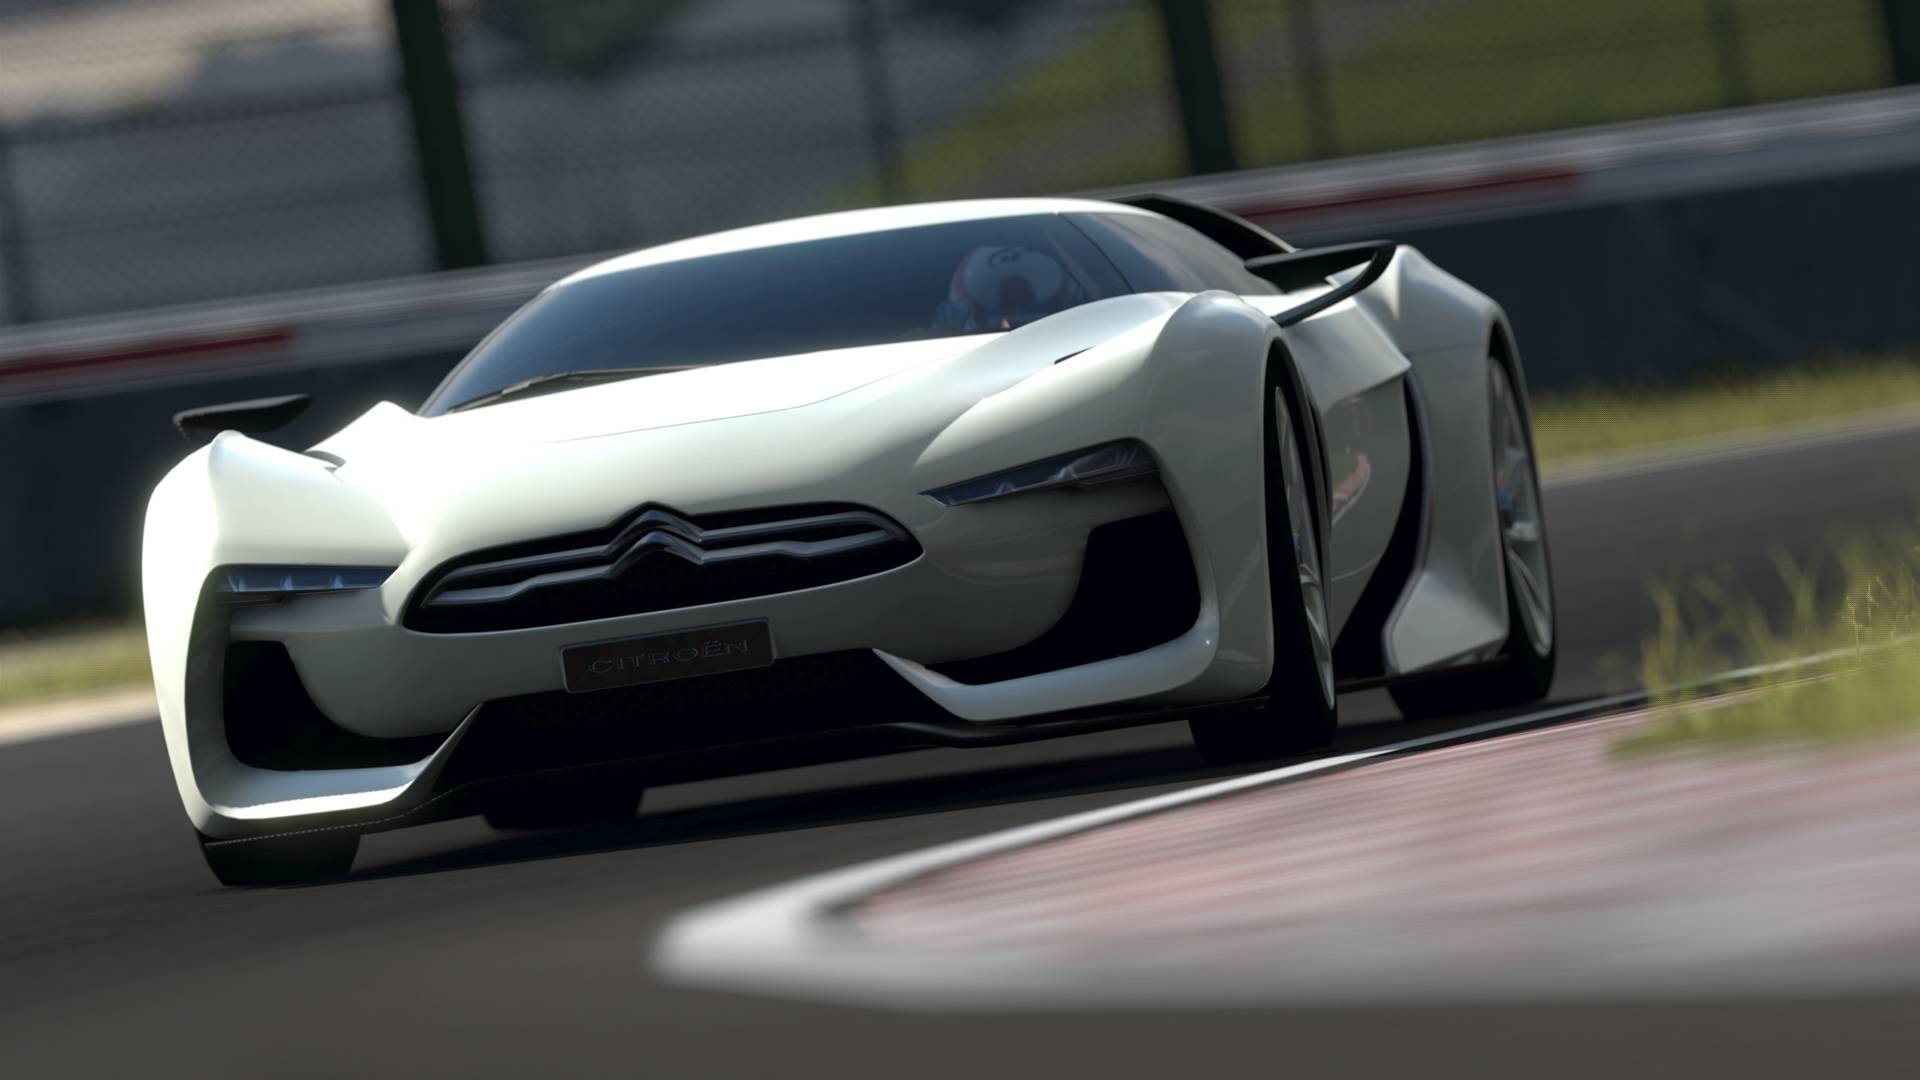 Gran Turismo 5: Prologue (Special Event Version GT by Citroën)